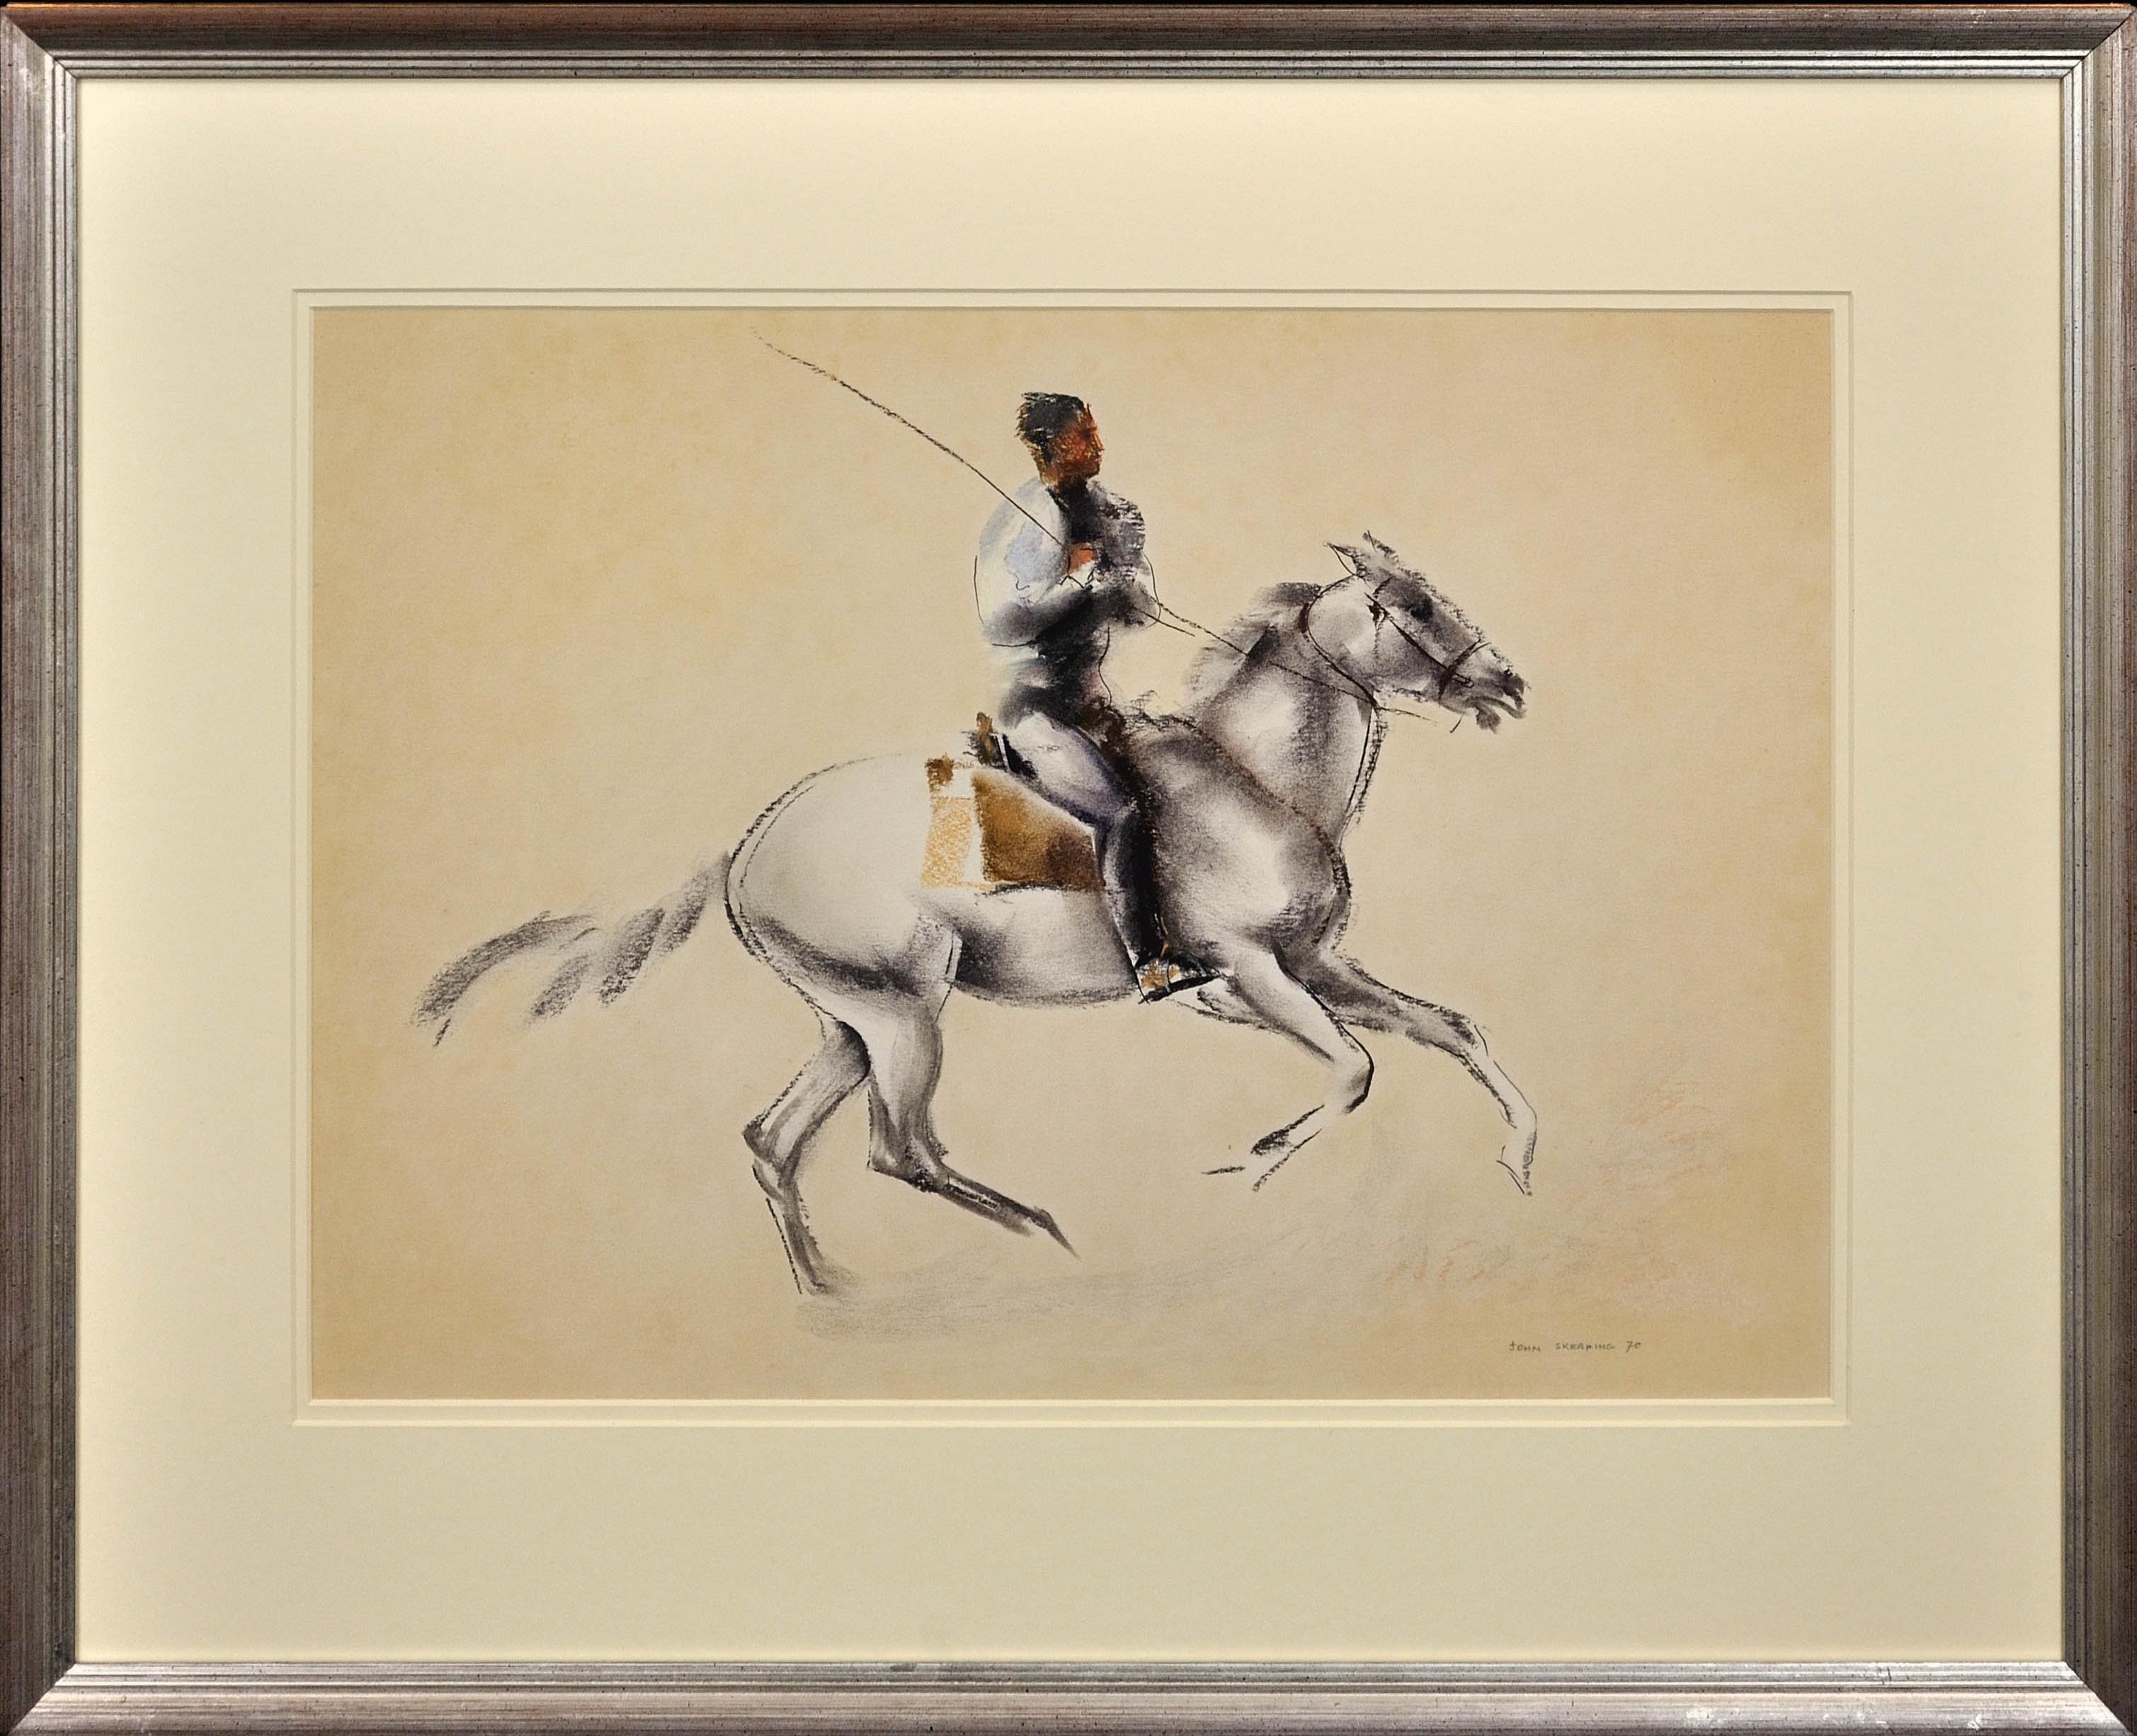 John Rattenbury Skeaping Figurative Art - Guardian, Cowboy and Horseman of the Camargue, South of France. Mid-Century.